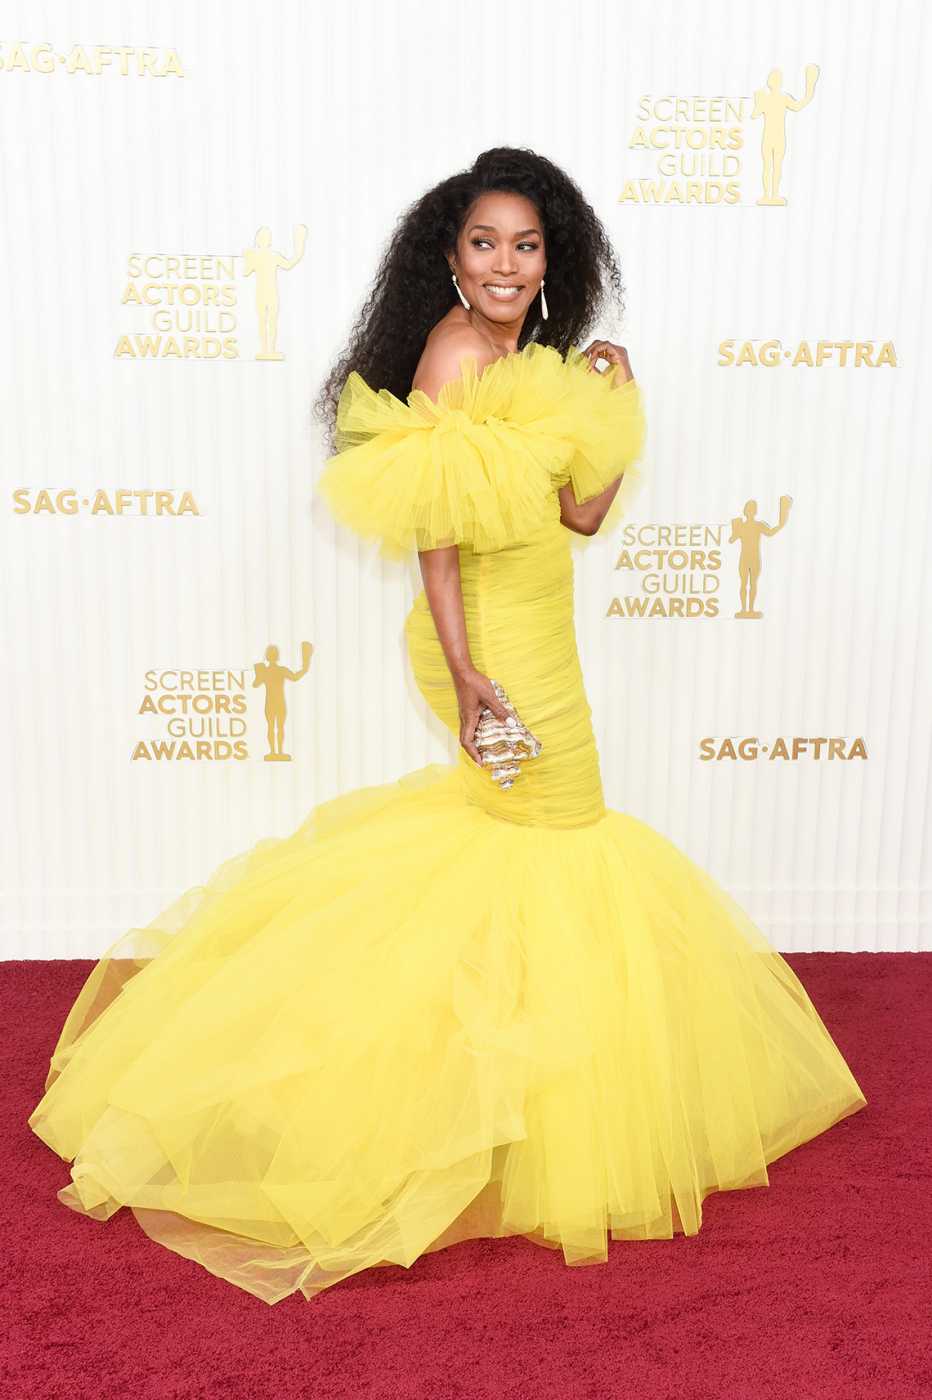 Angela Bassett wearing a yellow dress on the red carpet at the 29th Annual Screen Actors Guild Awards